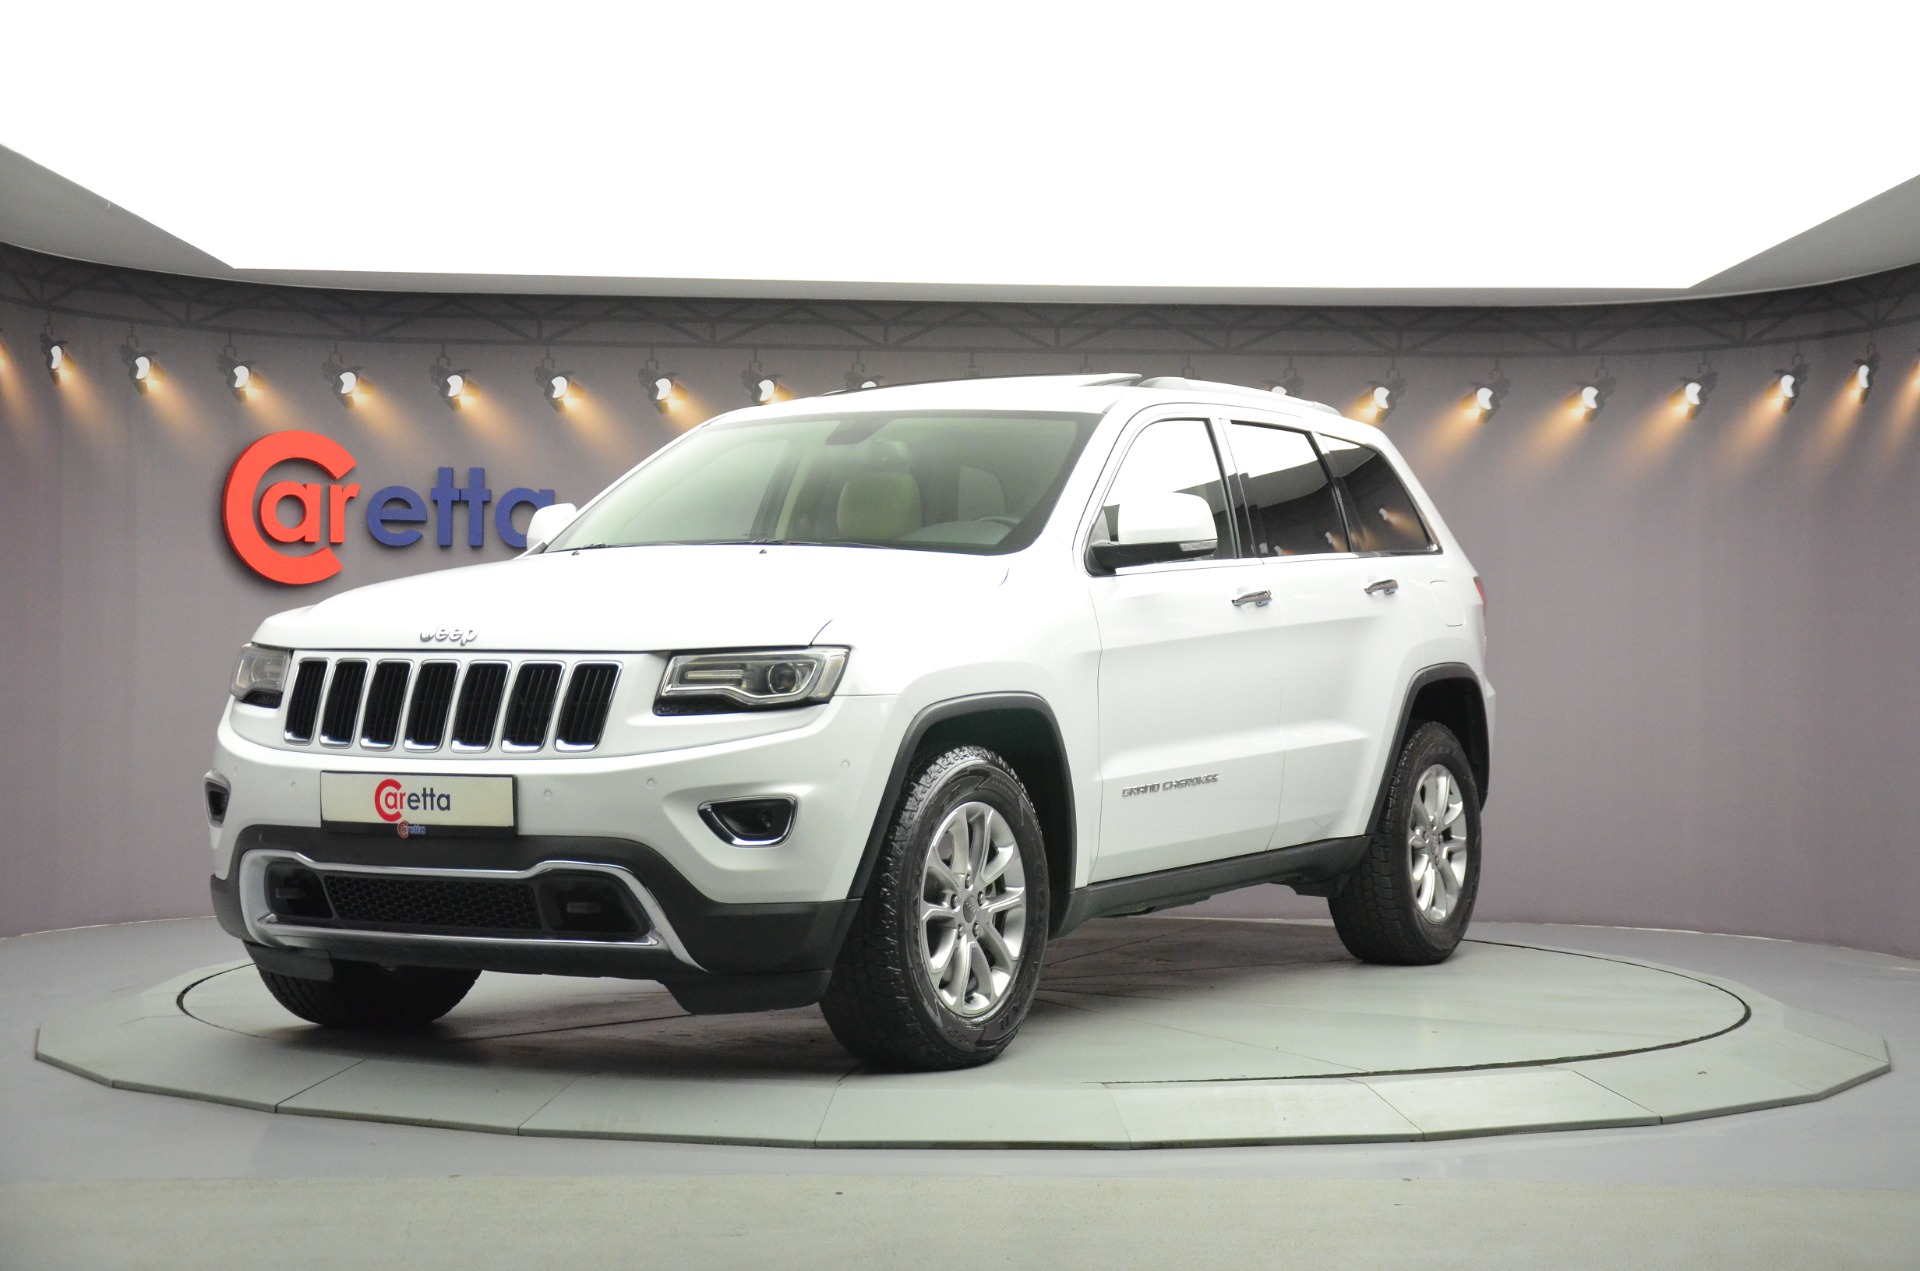 2013 Model Jeep Grand Cherokee 3.0 CRD V6 Limited-0